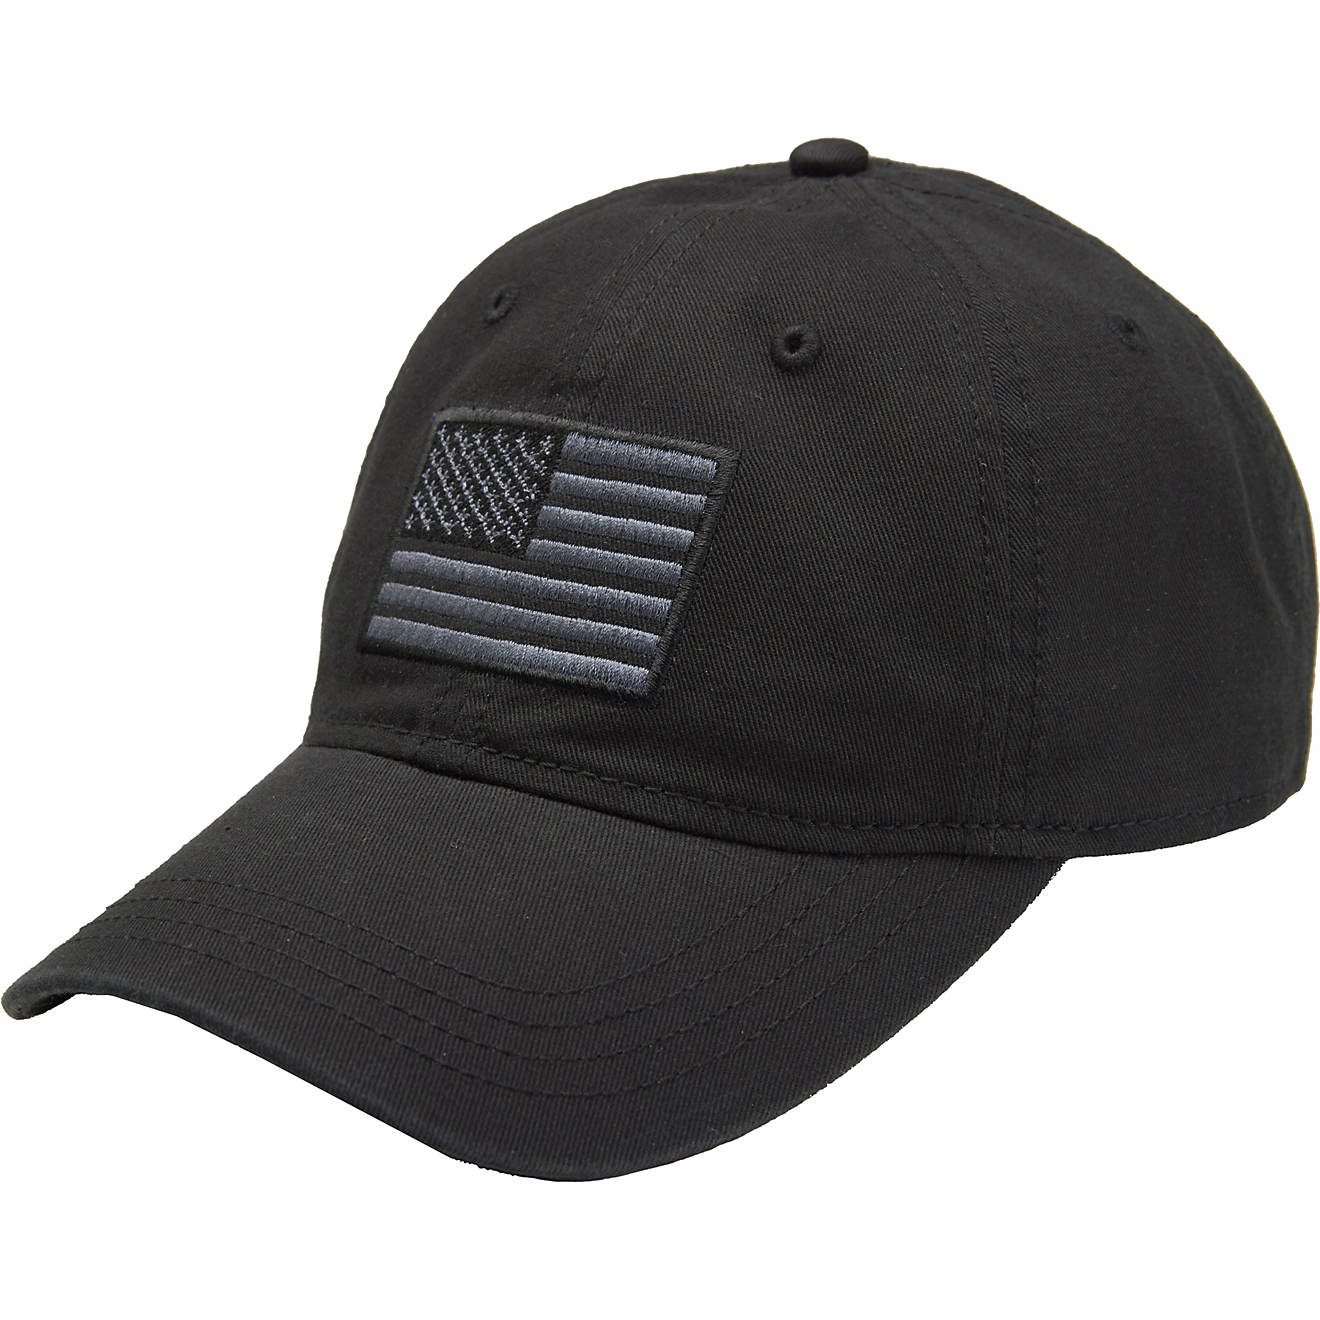 Academy Sports + Outdoors Men's Tonal American Flag Solid Twill Hat (Black)